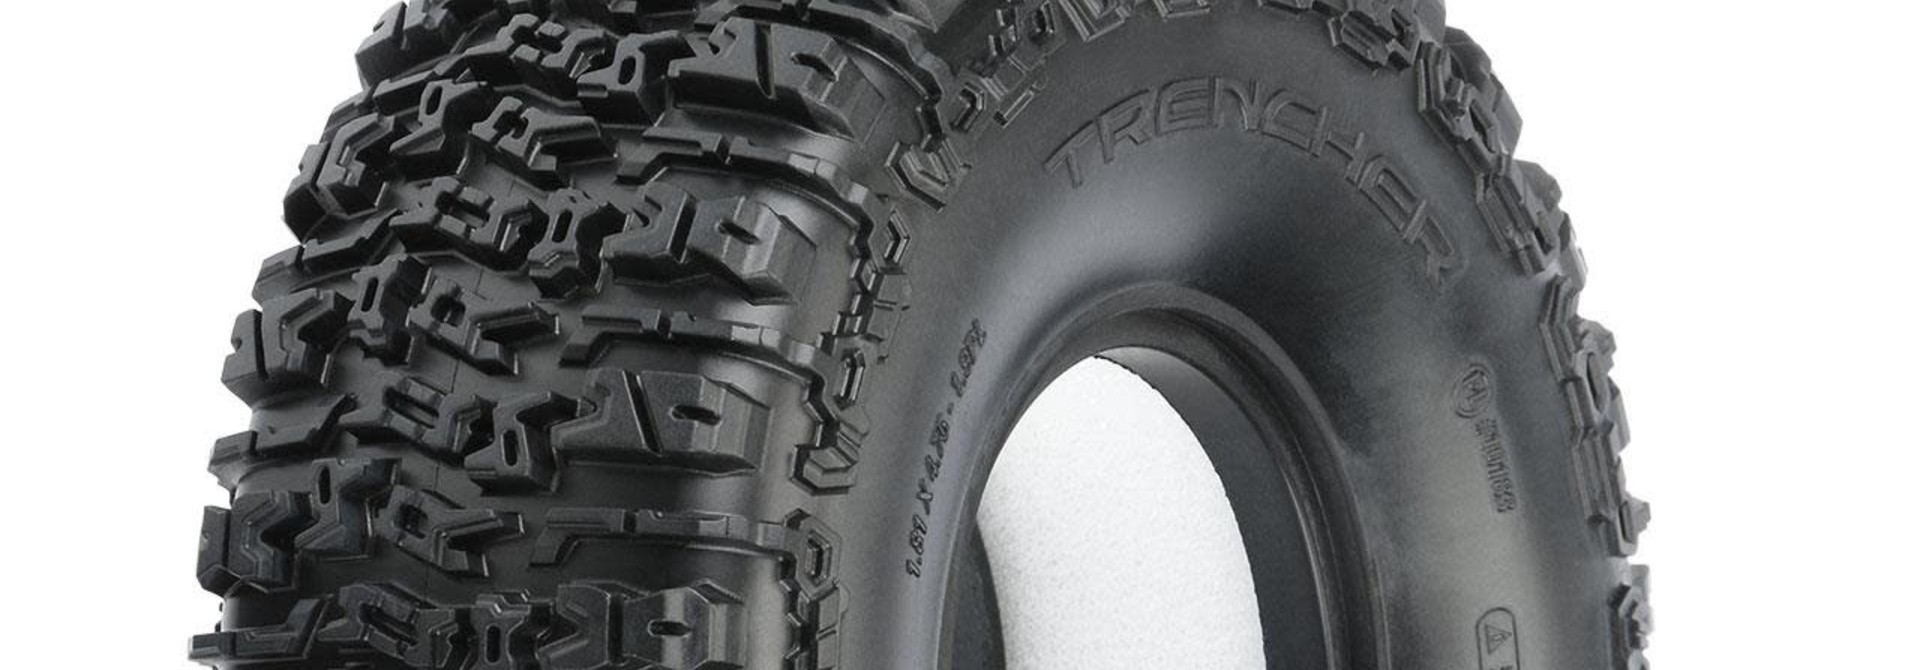 Trencher 1.9" G8 Rock Terrain Truck Tires (2) for Front or Rear